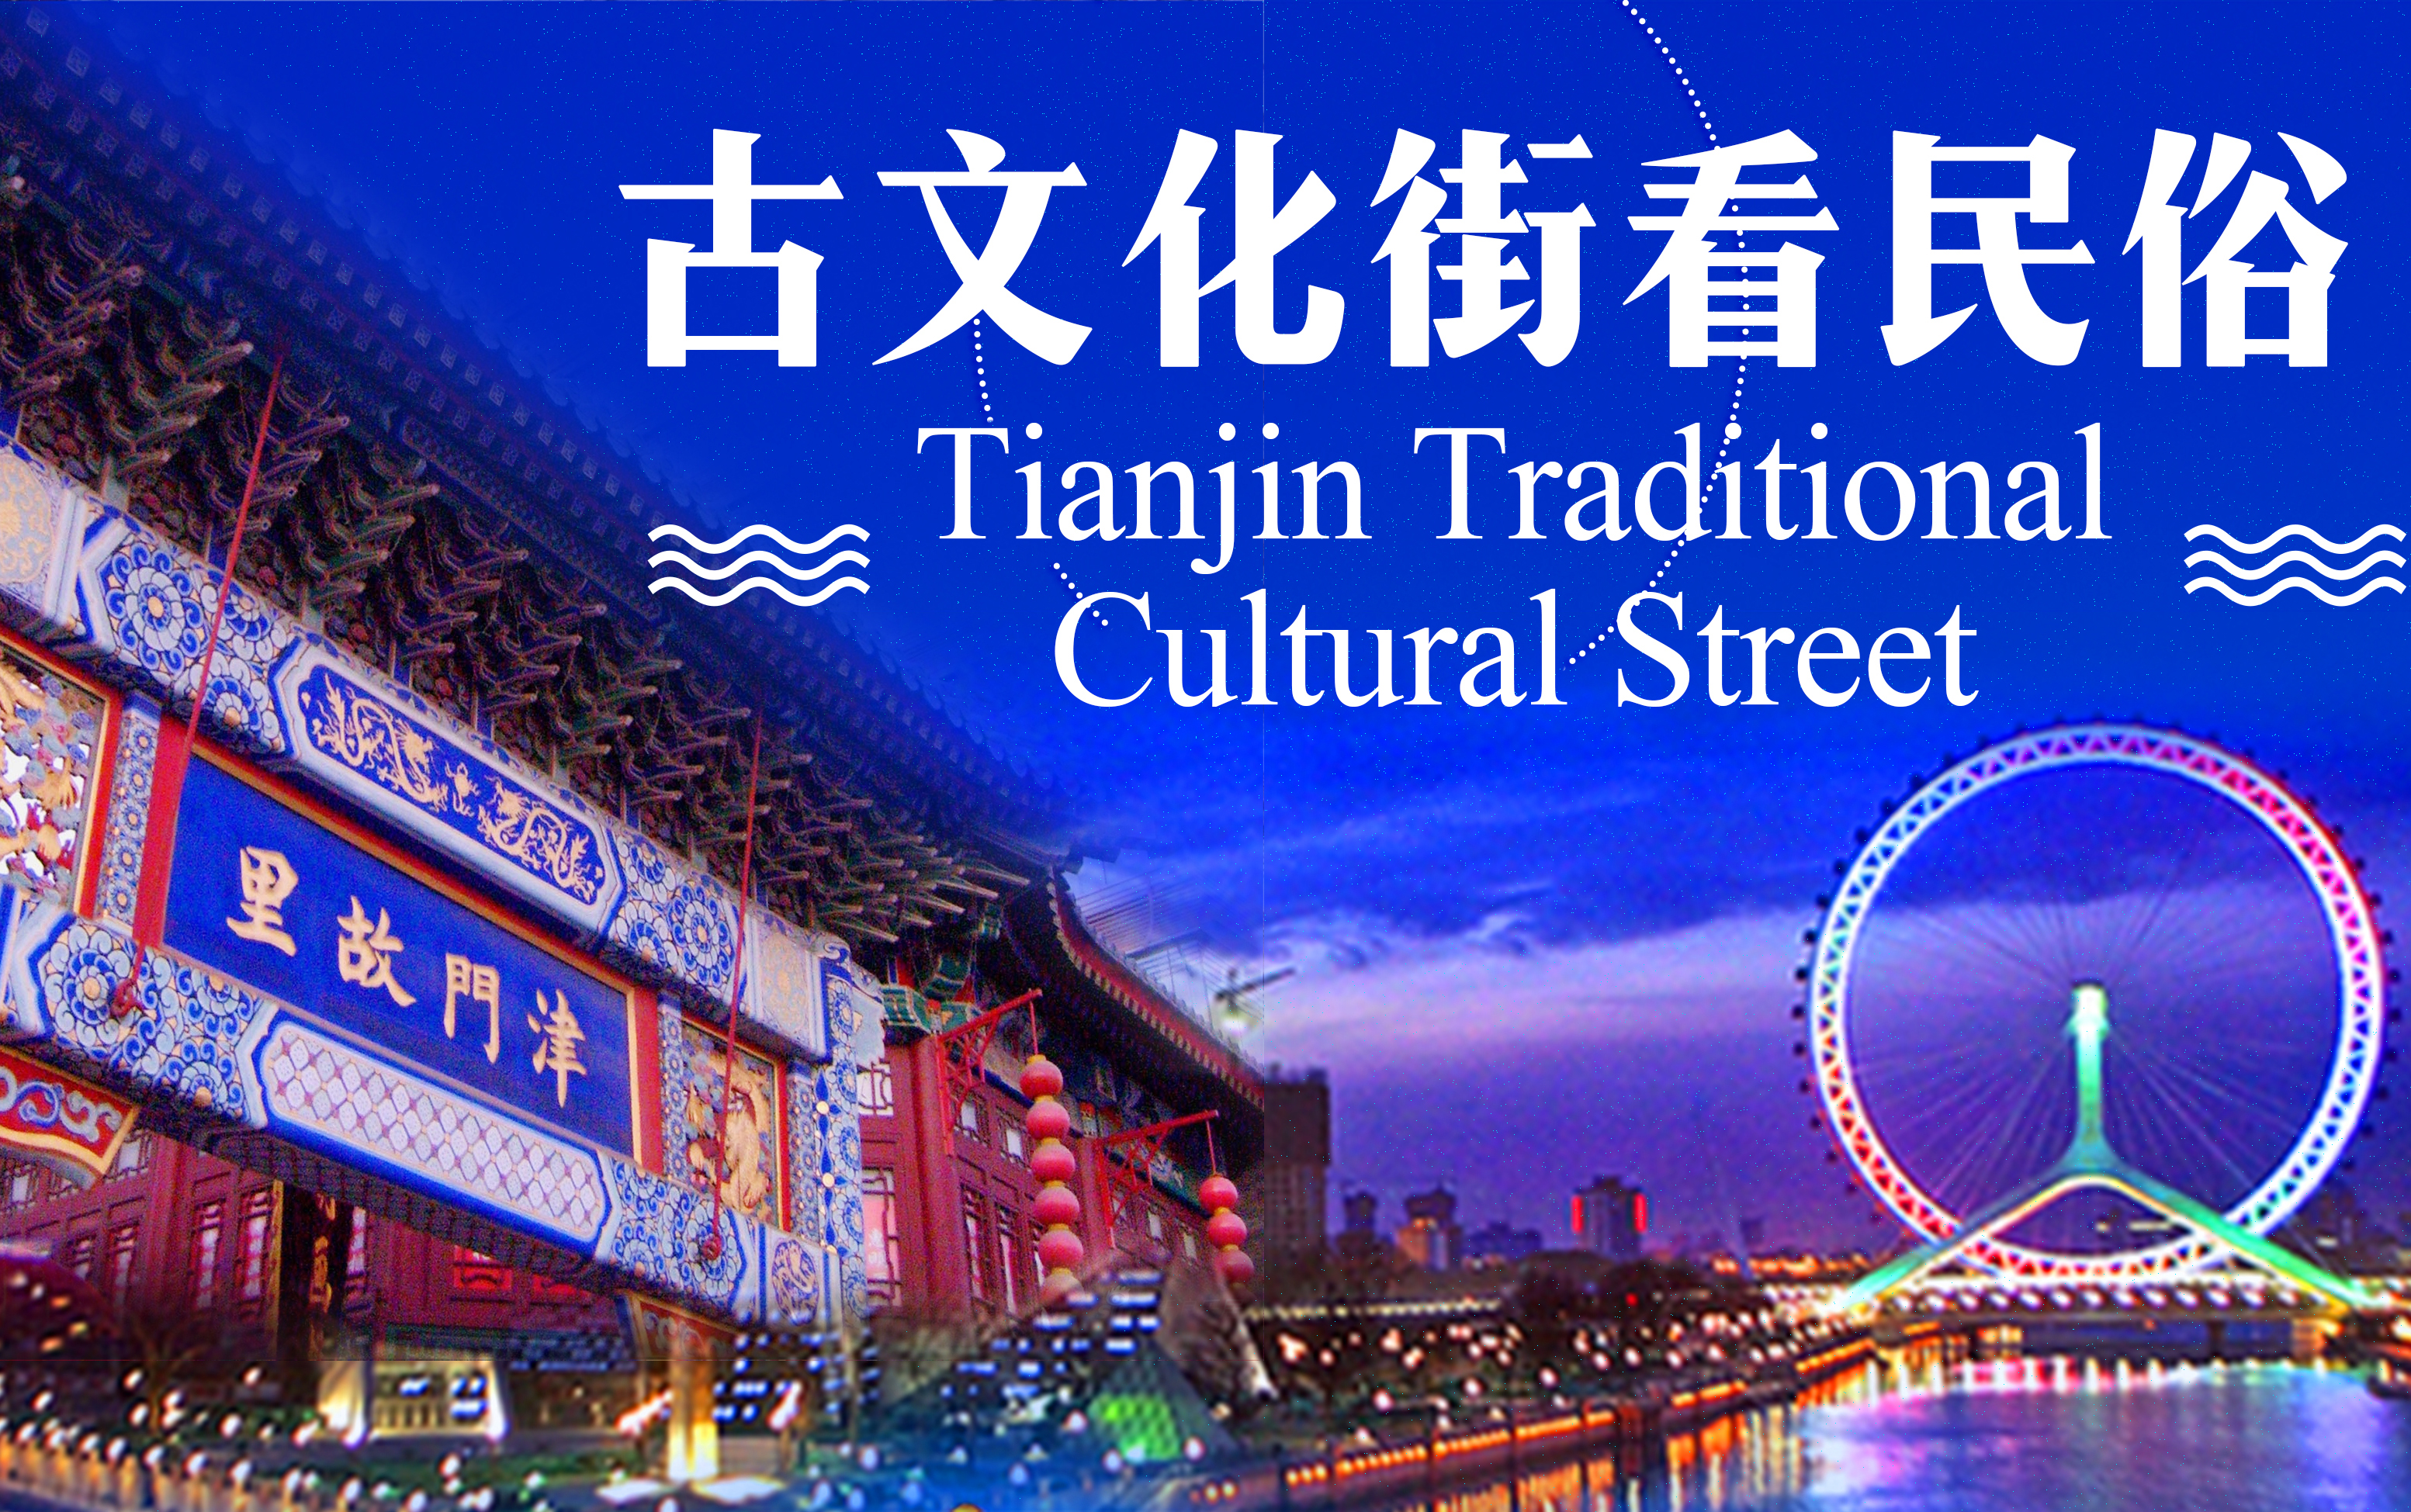 Tianjin Traditional Cultural Street